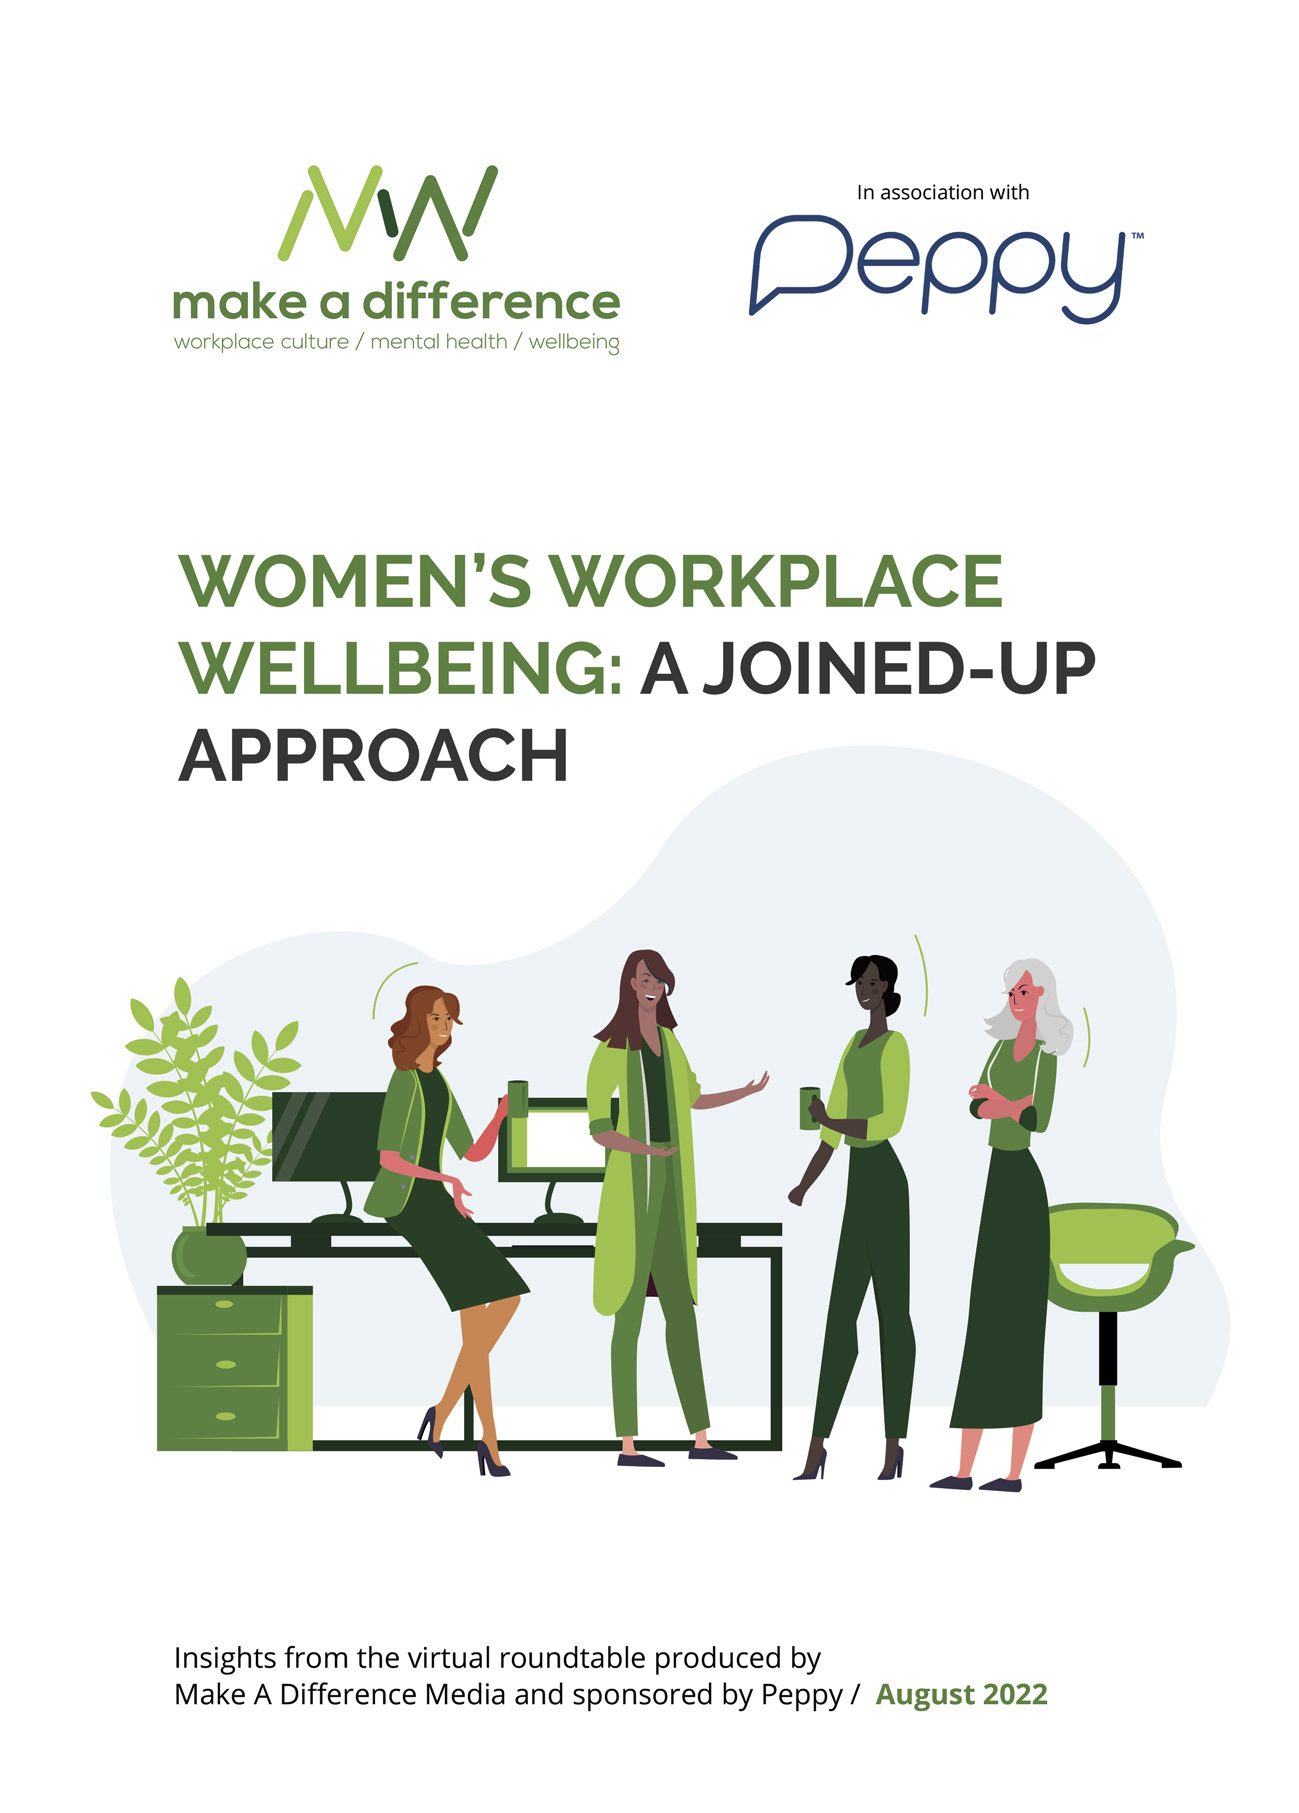 Women’s Workplace Wellbeing: A Joined Up Approach